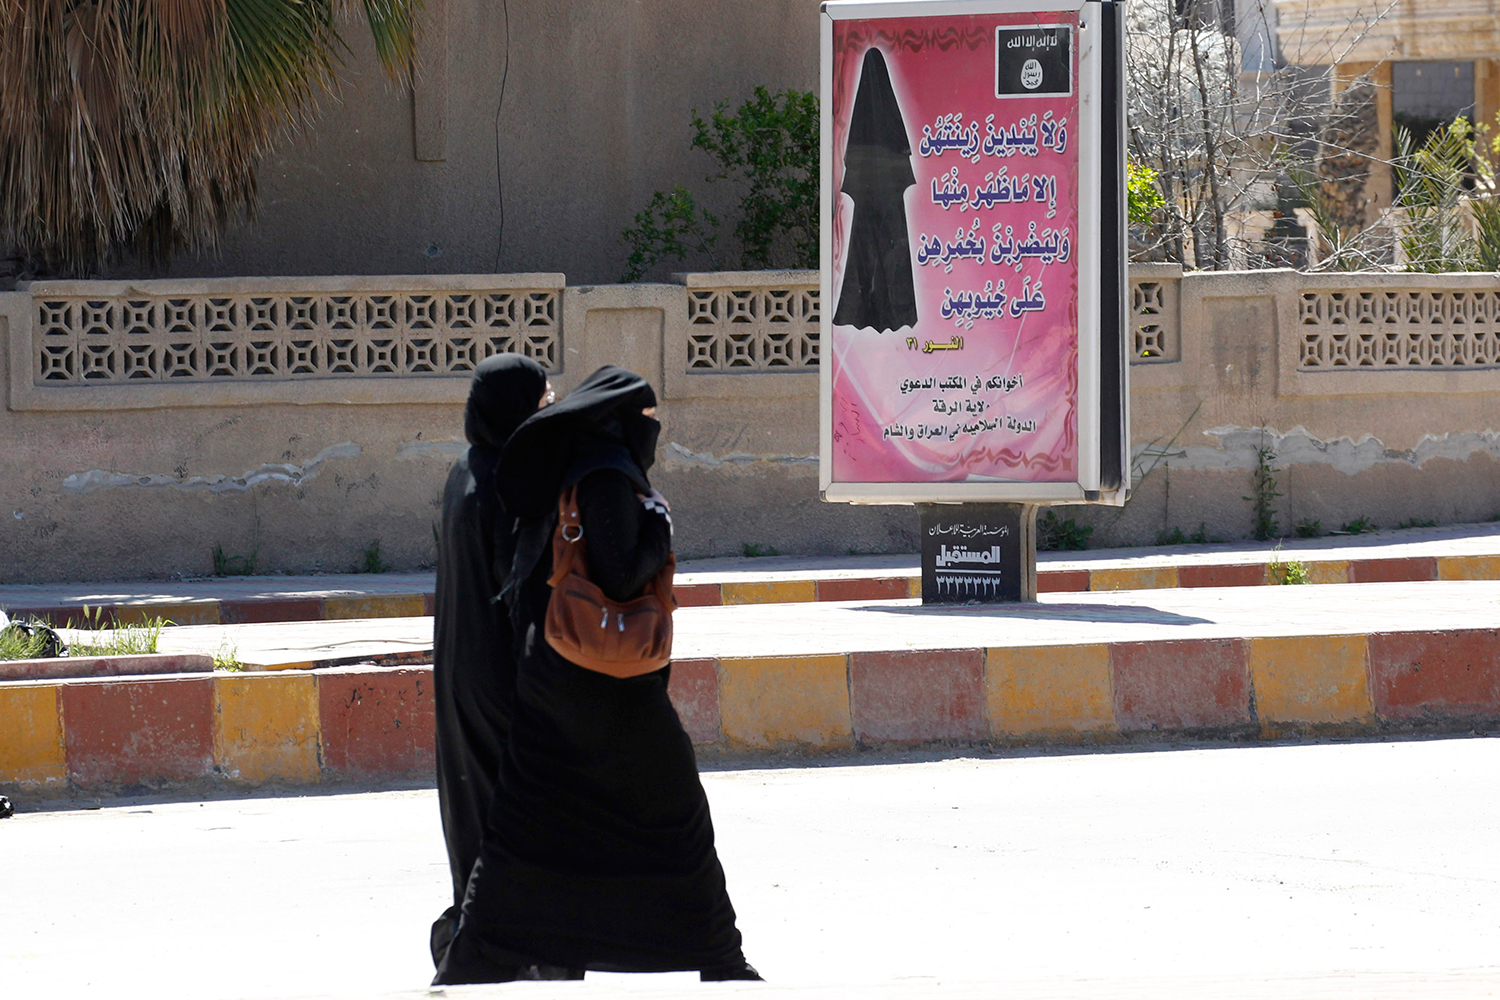 The Islamic State expels gynecologists in Raqqa